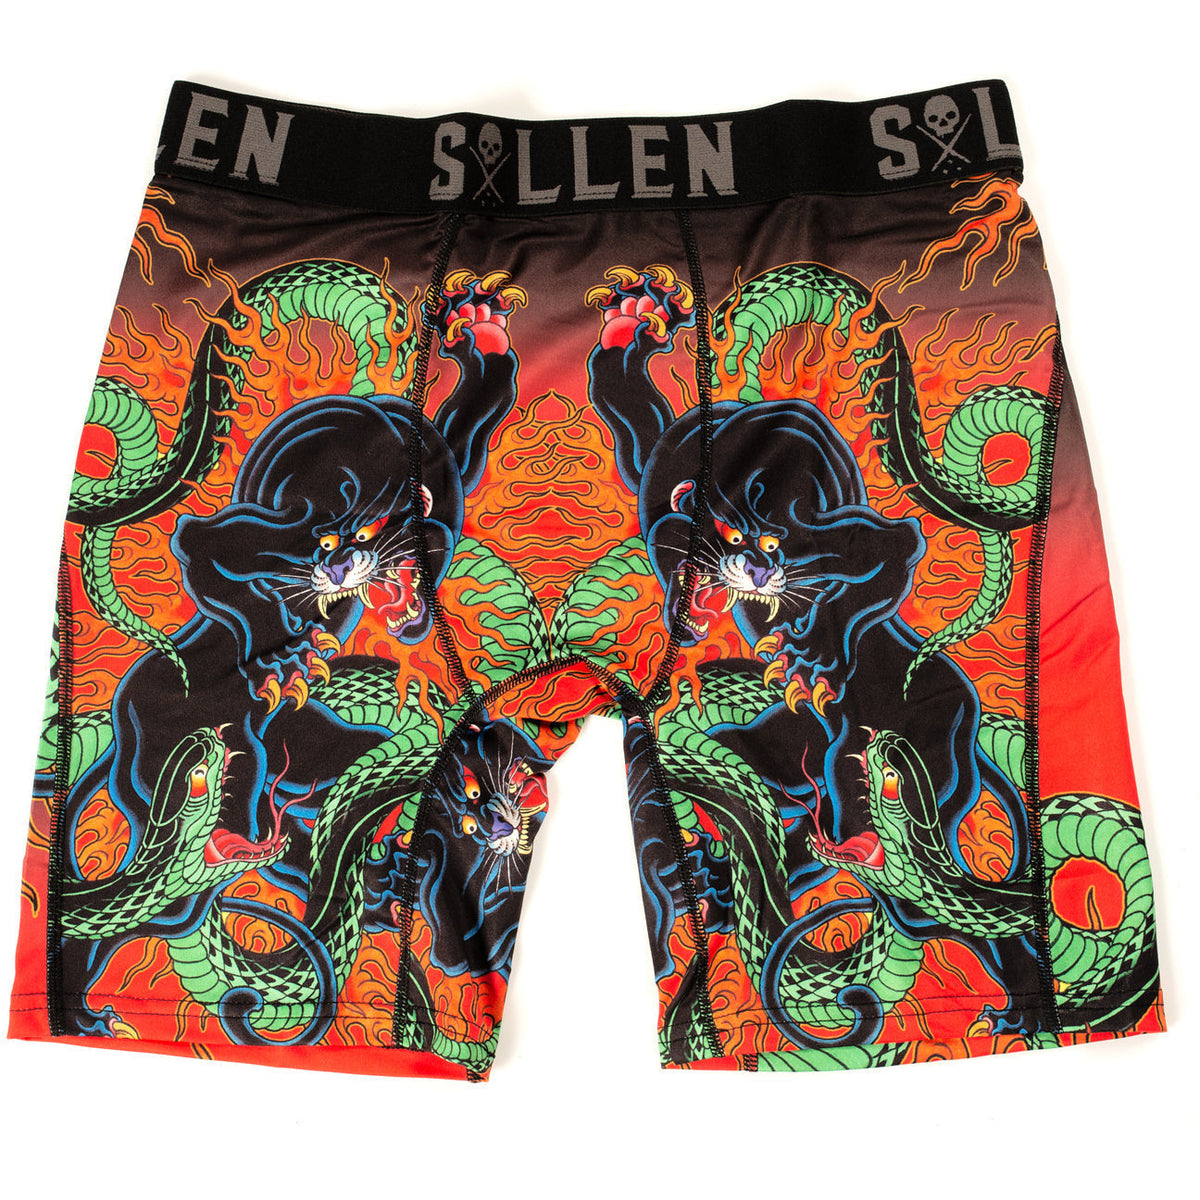 SULLEN-ART-COLLECTIVE-CHRISTOS-BOXERS - UNDERWEAR - Synik Clothing - synikclothing.com